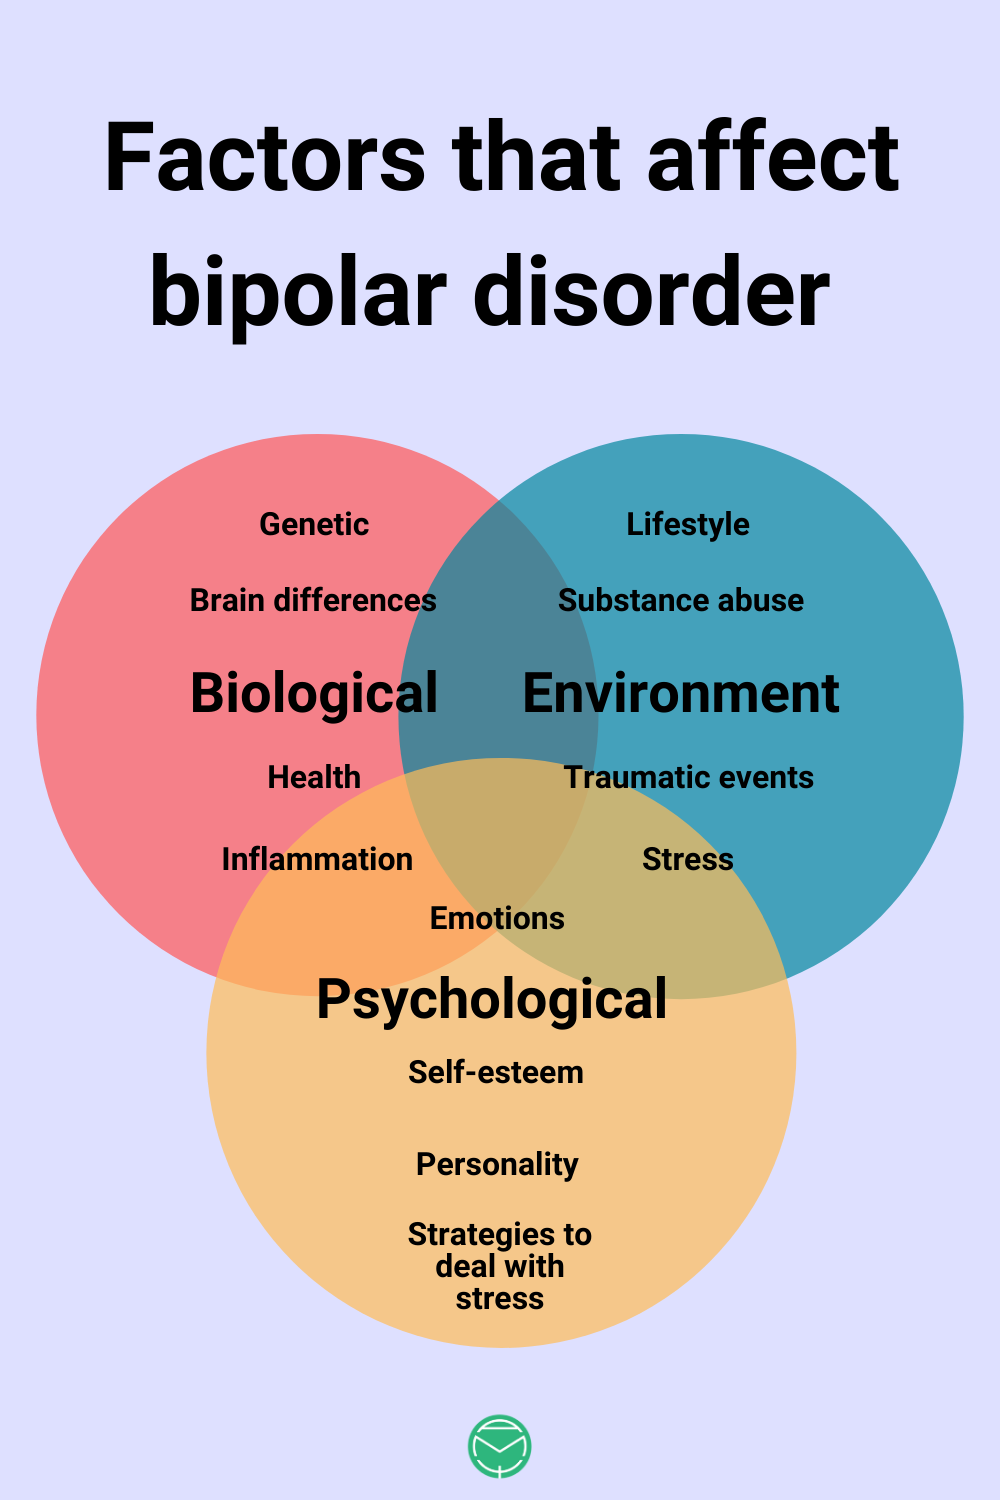 How to understand bipolar disorder